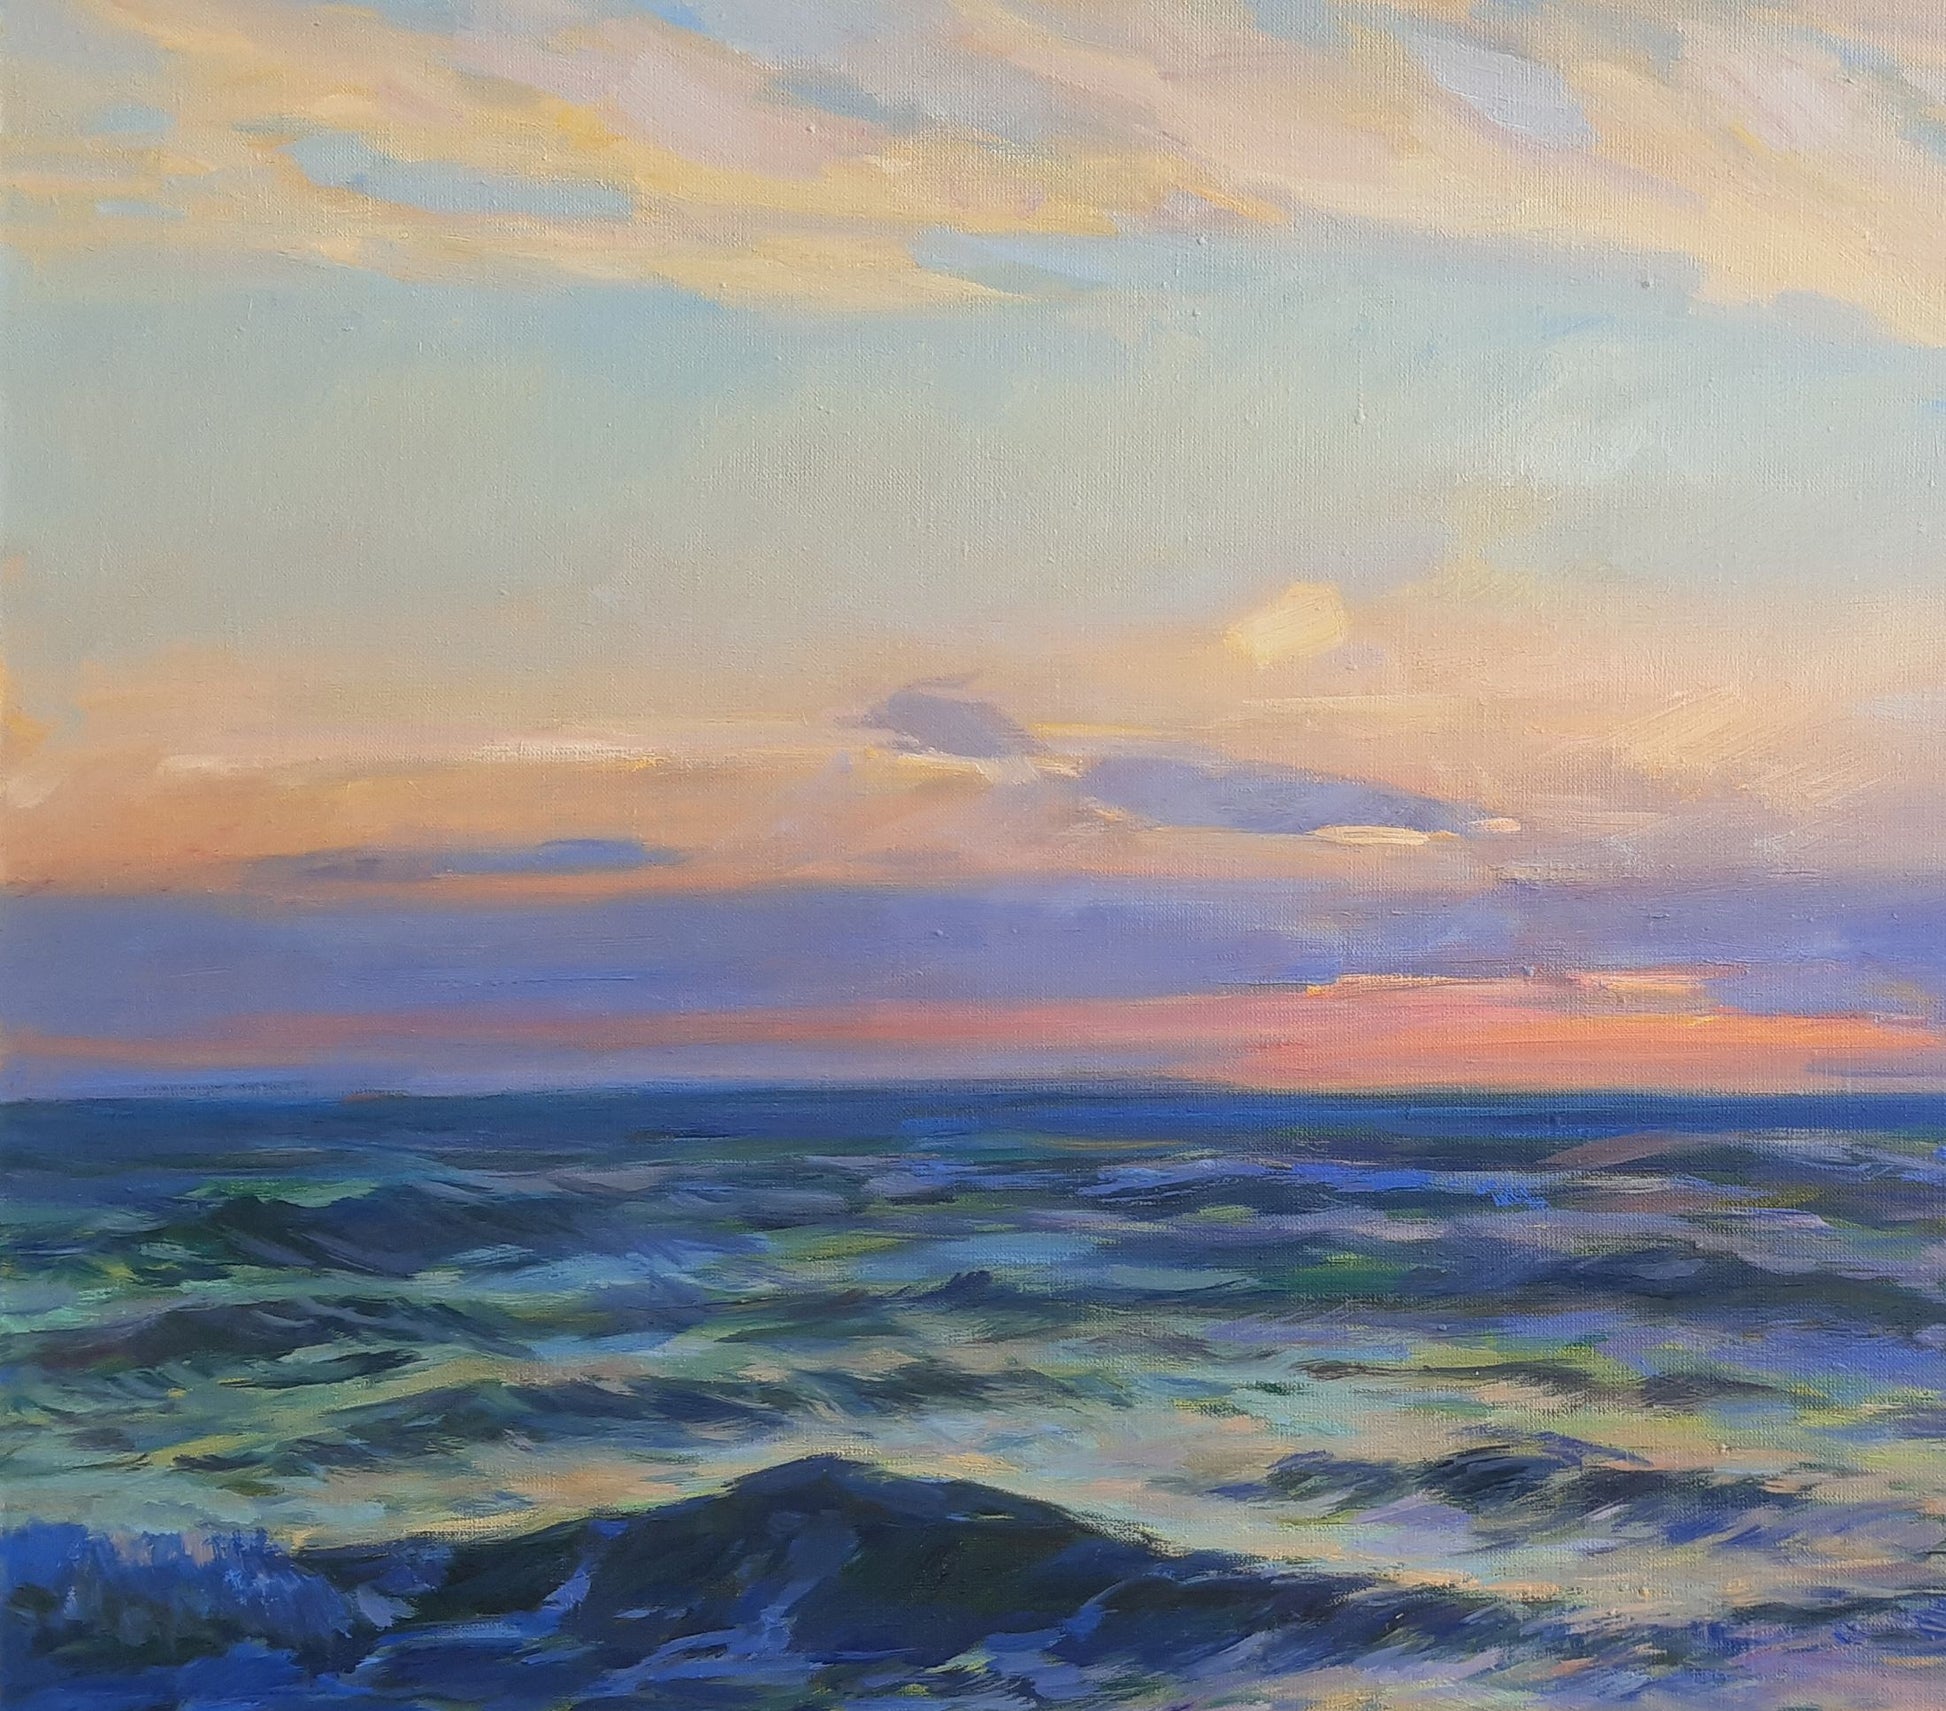 Oil painting "Evening at Sea" by Vyacheslav Pereta